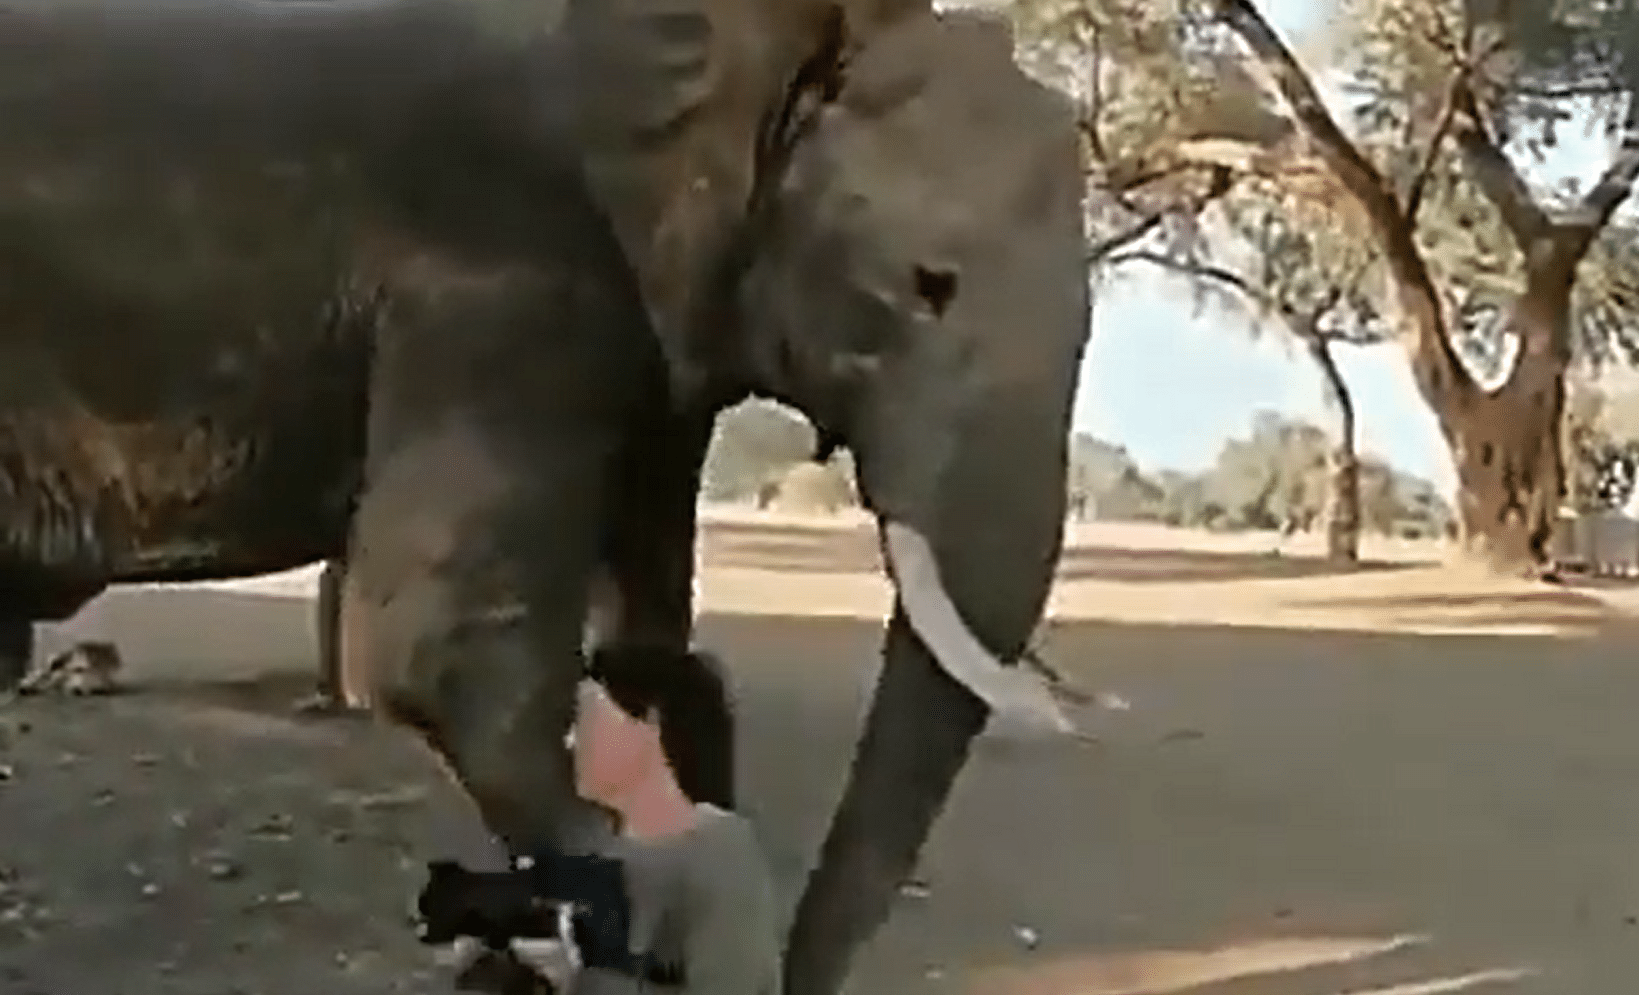 elephant moved woman photographer out of his way